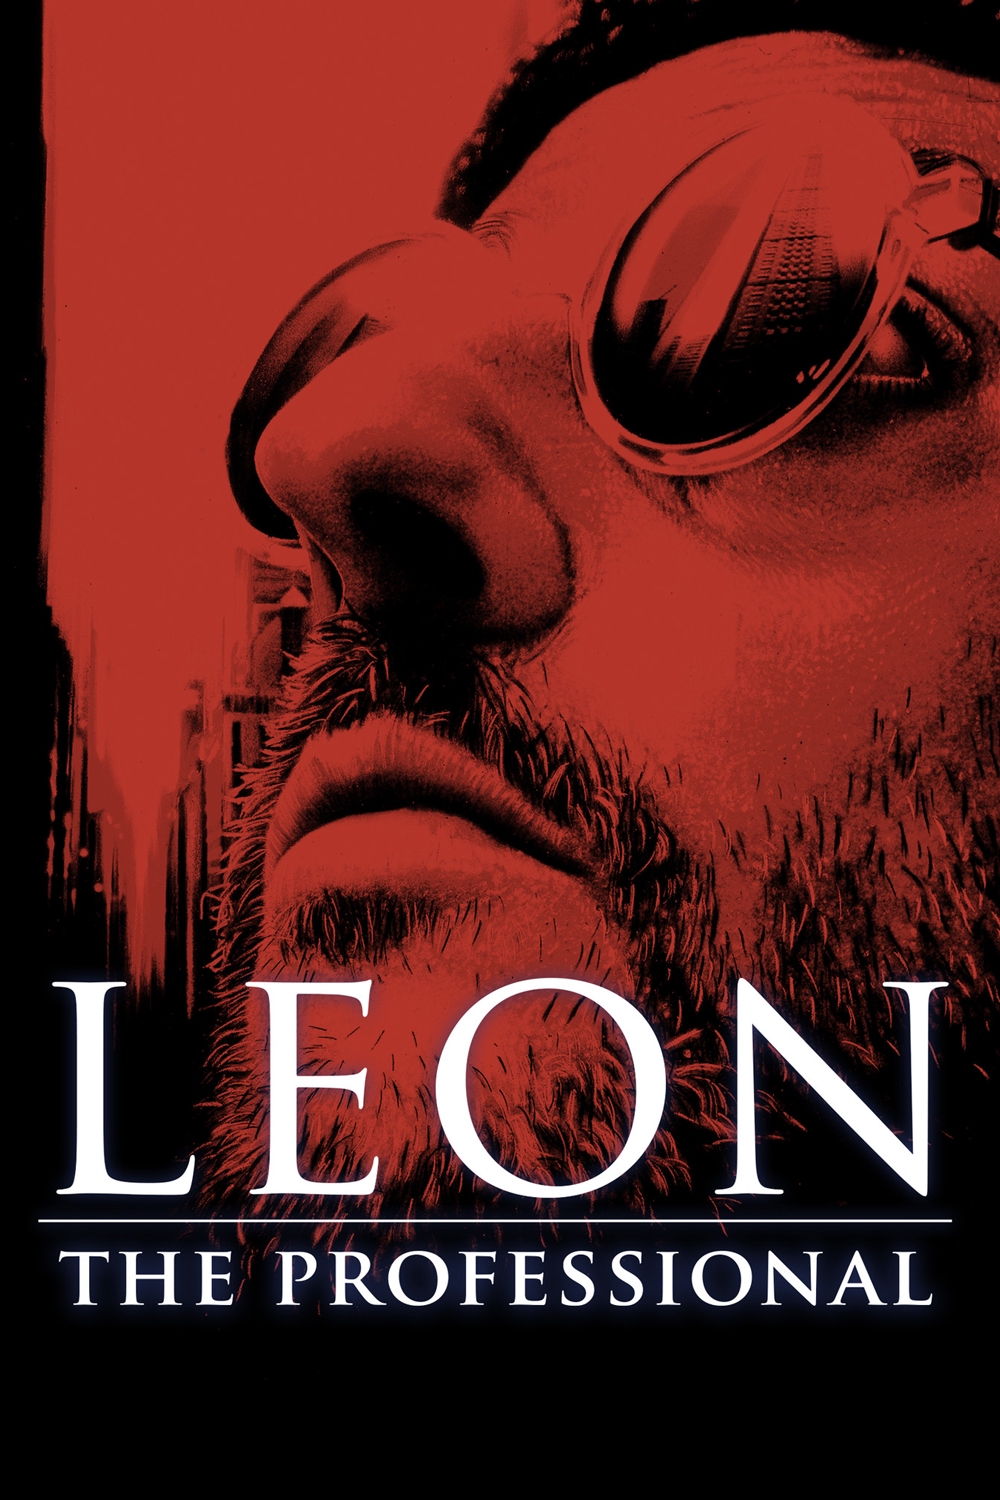 watch leon the professional movie